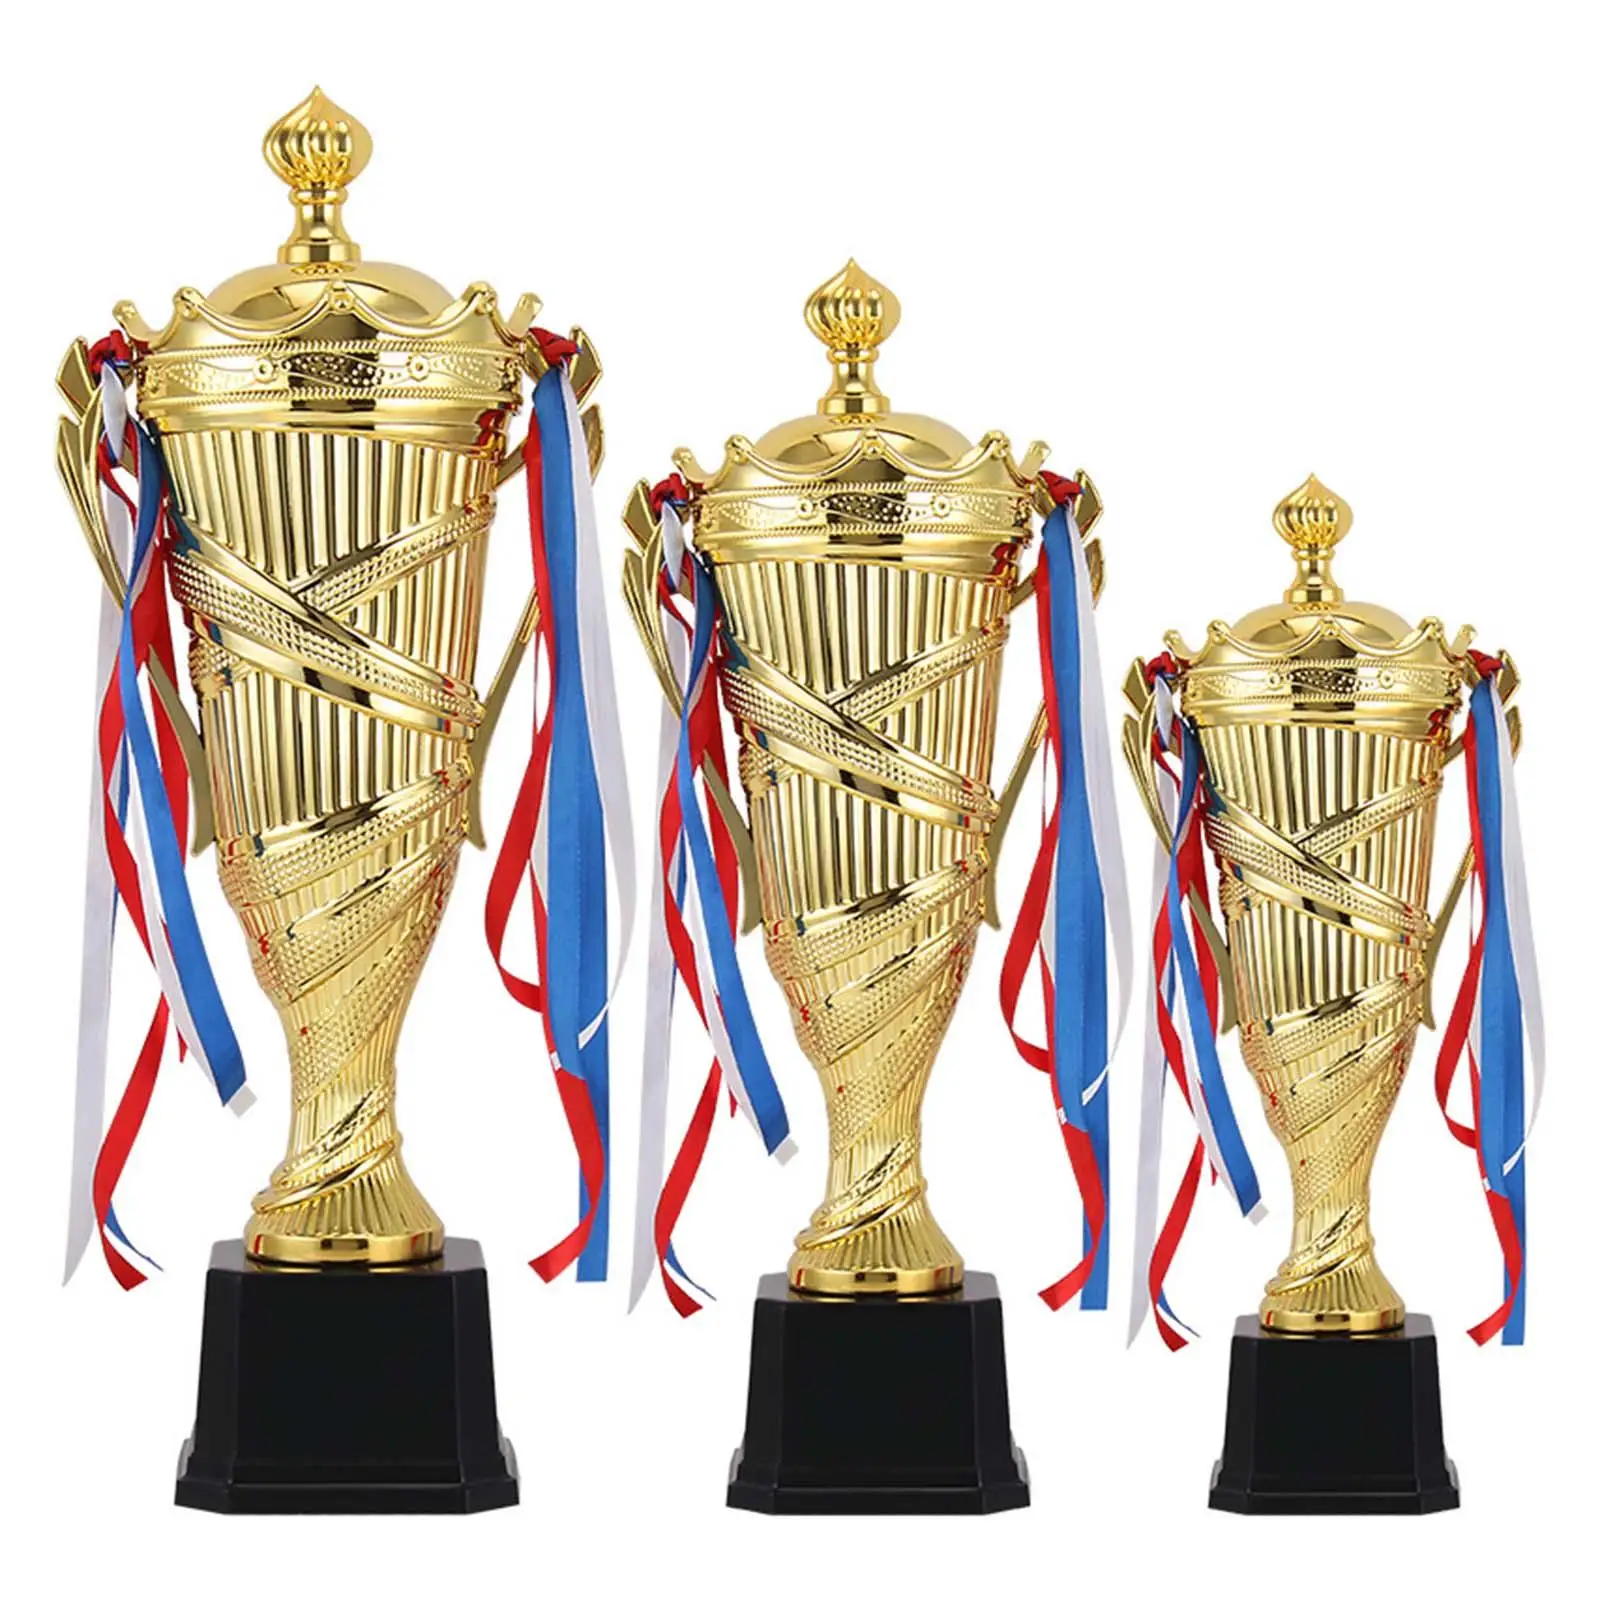 Adults Trophy Achievement Trophy with Lid Trophy for Award Ceremonies Appreciation Gifts Party Favors Rewards Football